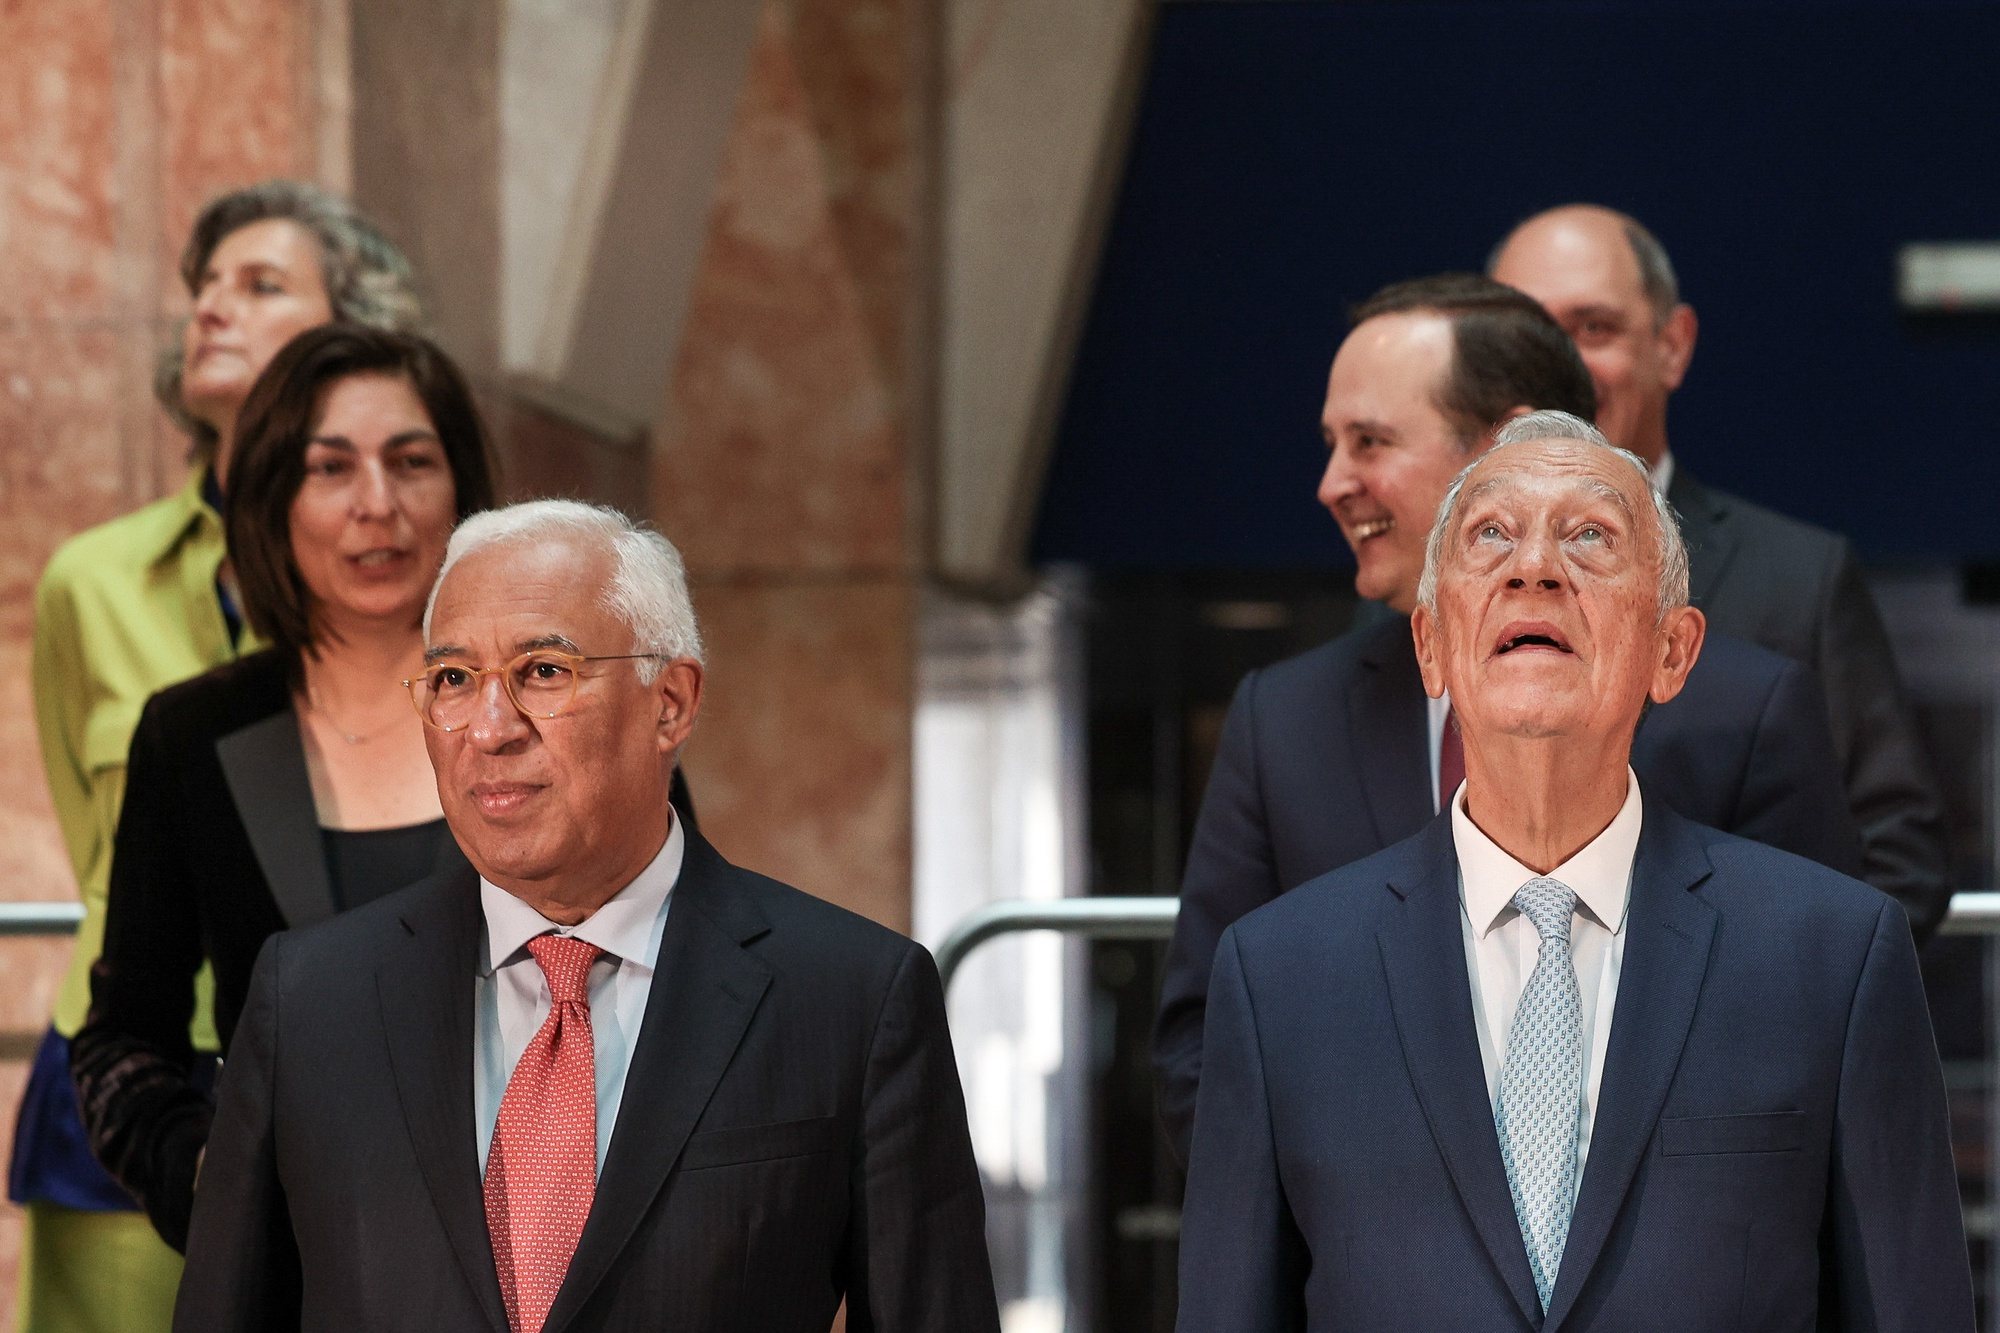 Portugal&#039;s President Marcelo Rebelo de Sousa (R) flanked by Prime Minister Antonio Costa (L), moments before posing for a family photo with the other members of the Government, during the last meeting of the Council of Ministers of the XXIII Constitutional Government, which he is chairing and which for the first time is being held in the new Government building, the former headquarters of Caixa Geral de Depósitos (CGD), in Lisbon, Portugal, 25 March 2024. The Council of Ministers of the government led by Antonio Costa is meeting for the last time today and will be chaired by the head of state, with the PRR&#039;s state of play being one of the topics on the agenda. TIAGO PETINGA/LUSA